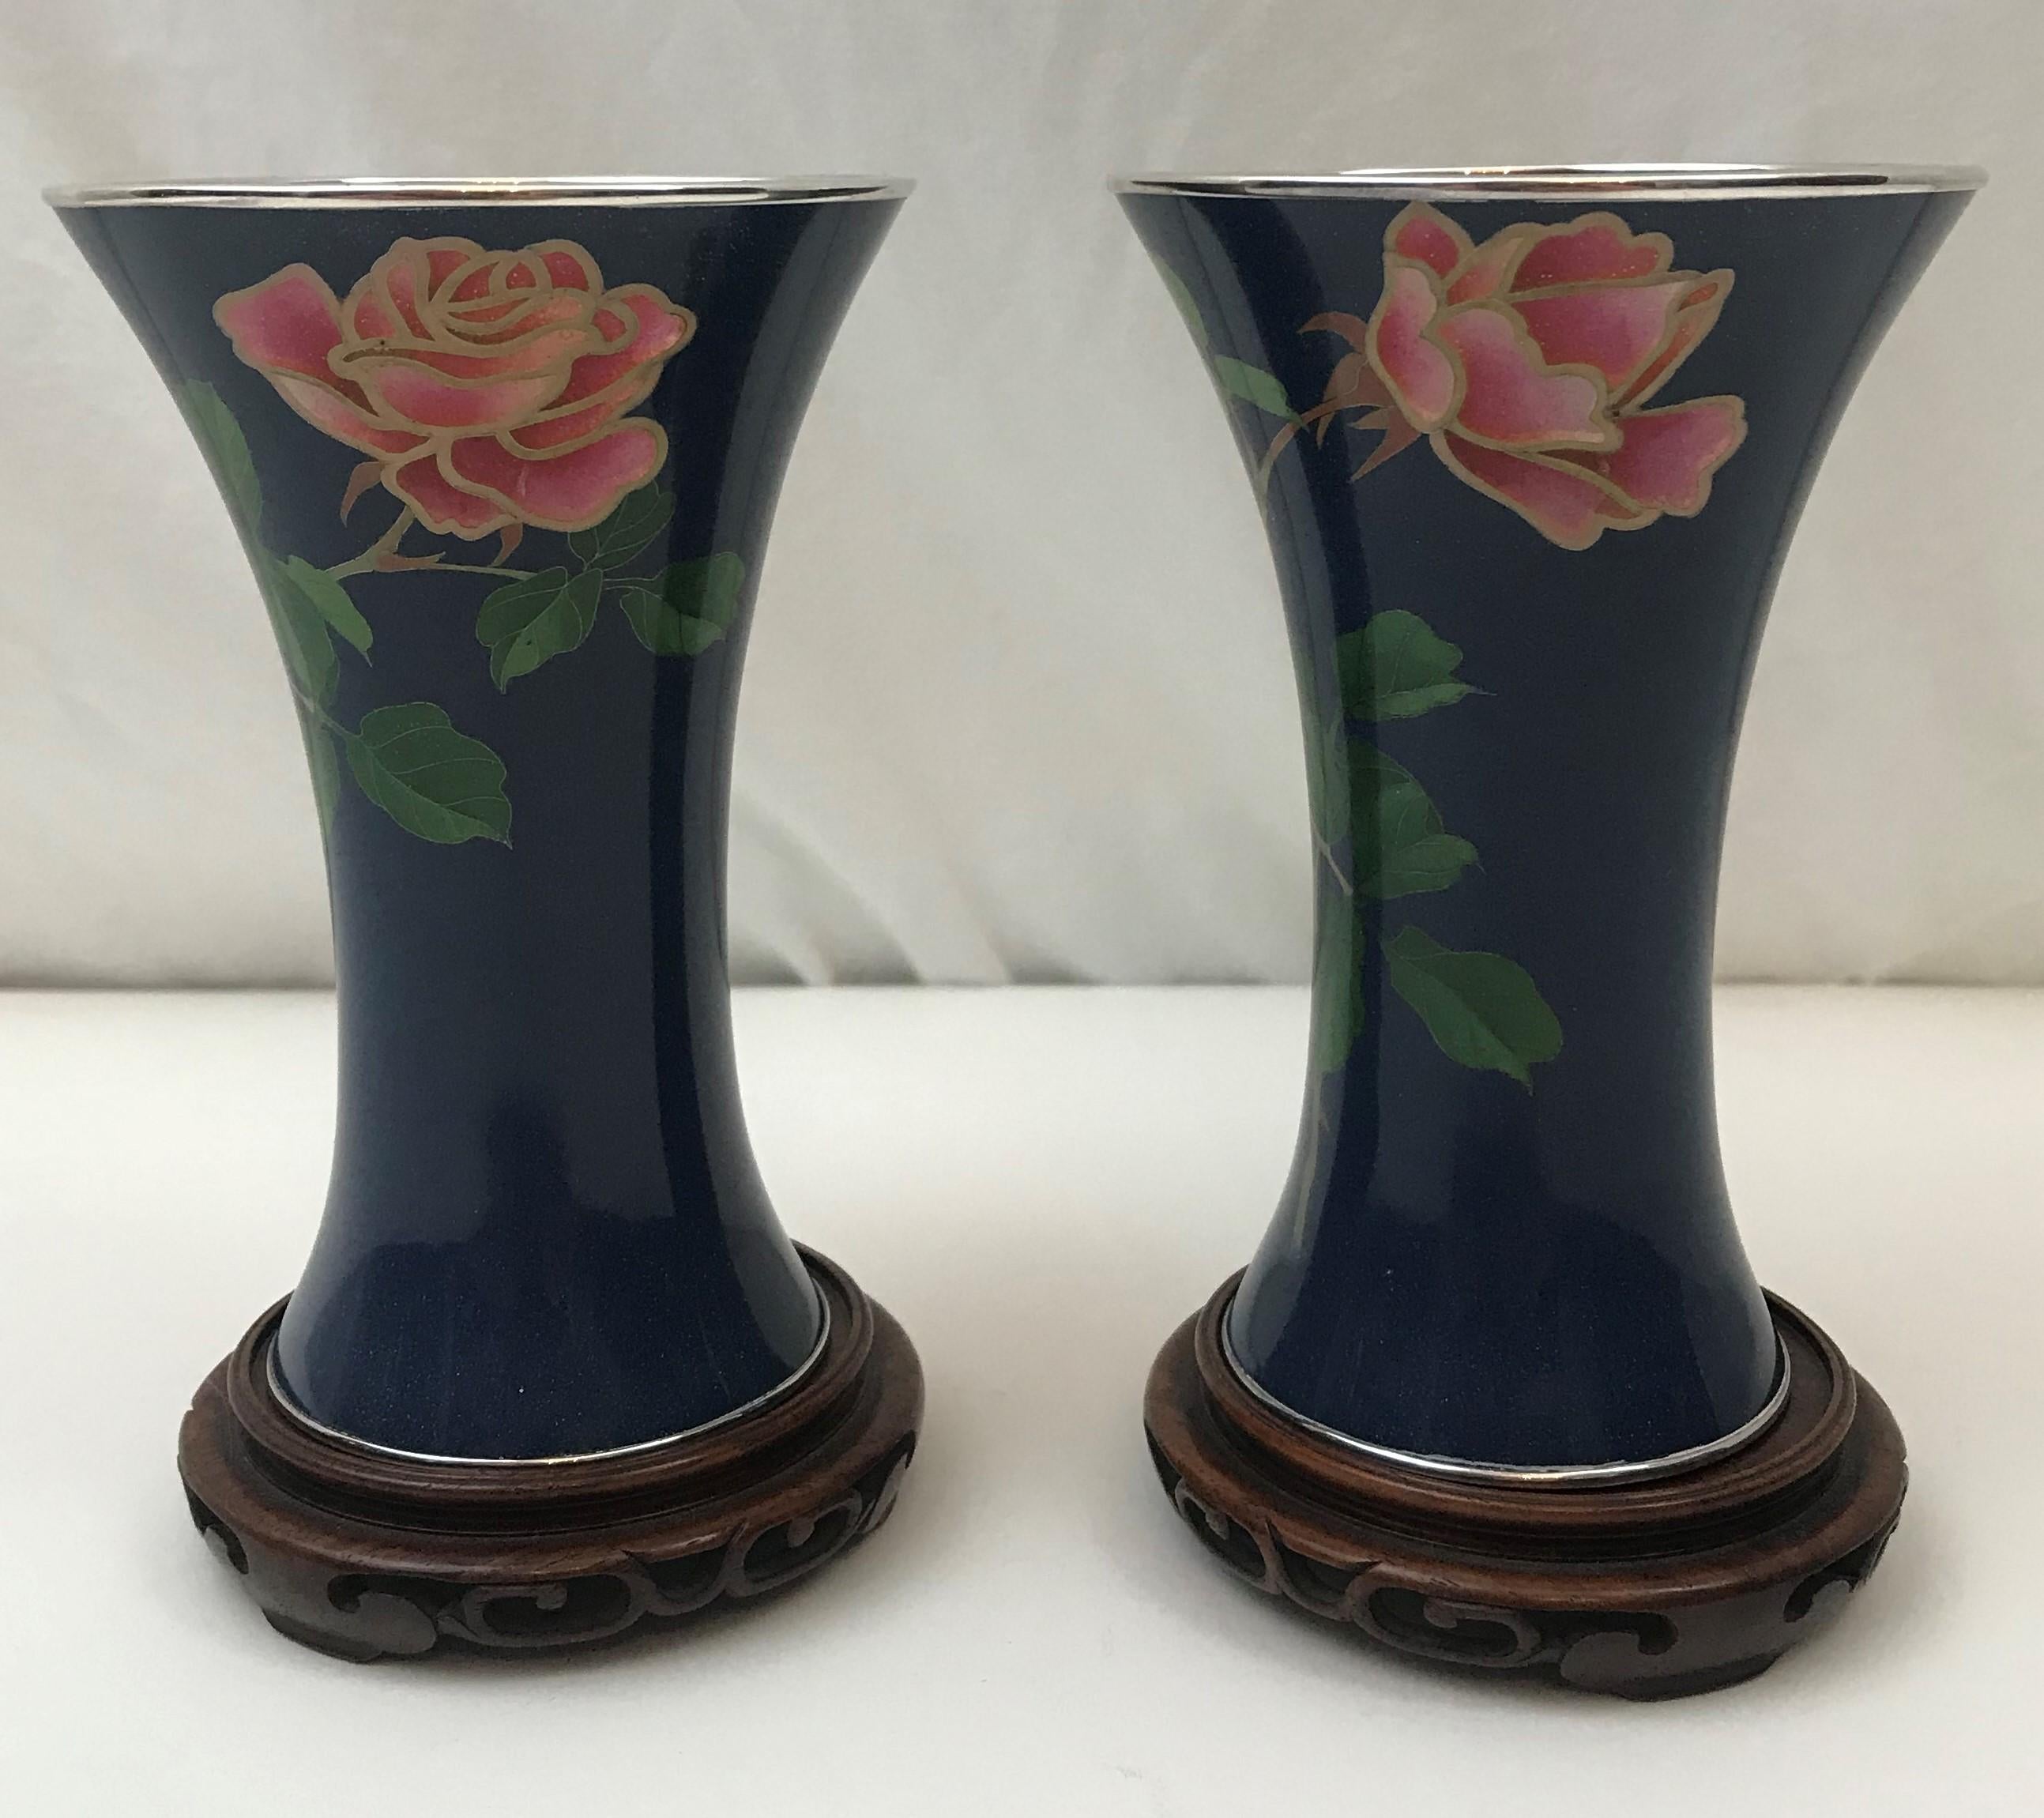 Pair of vases. Japanese wireless cloisonne on silver with plique-a-jour (totai shippo) translucent enamel flowers.

Each vase with the mark of Ando Jubei. The plique a jour process was developed by the Ando Company in the early 20th century.